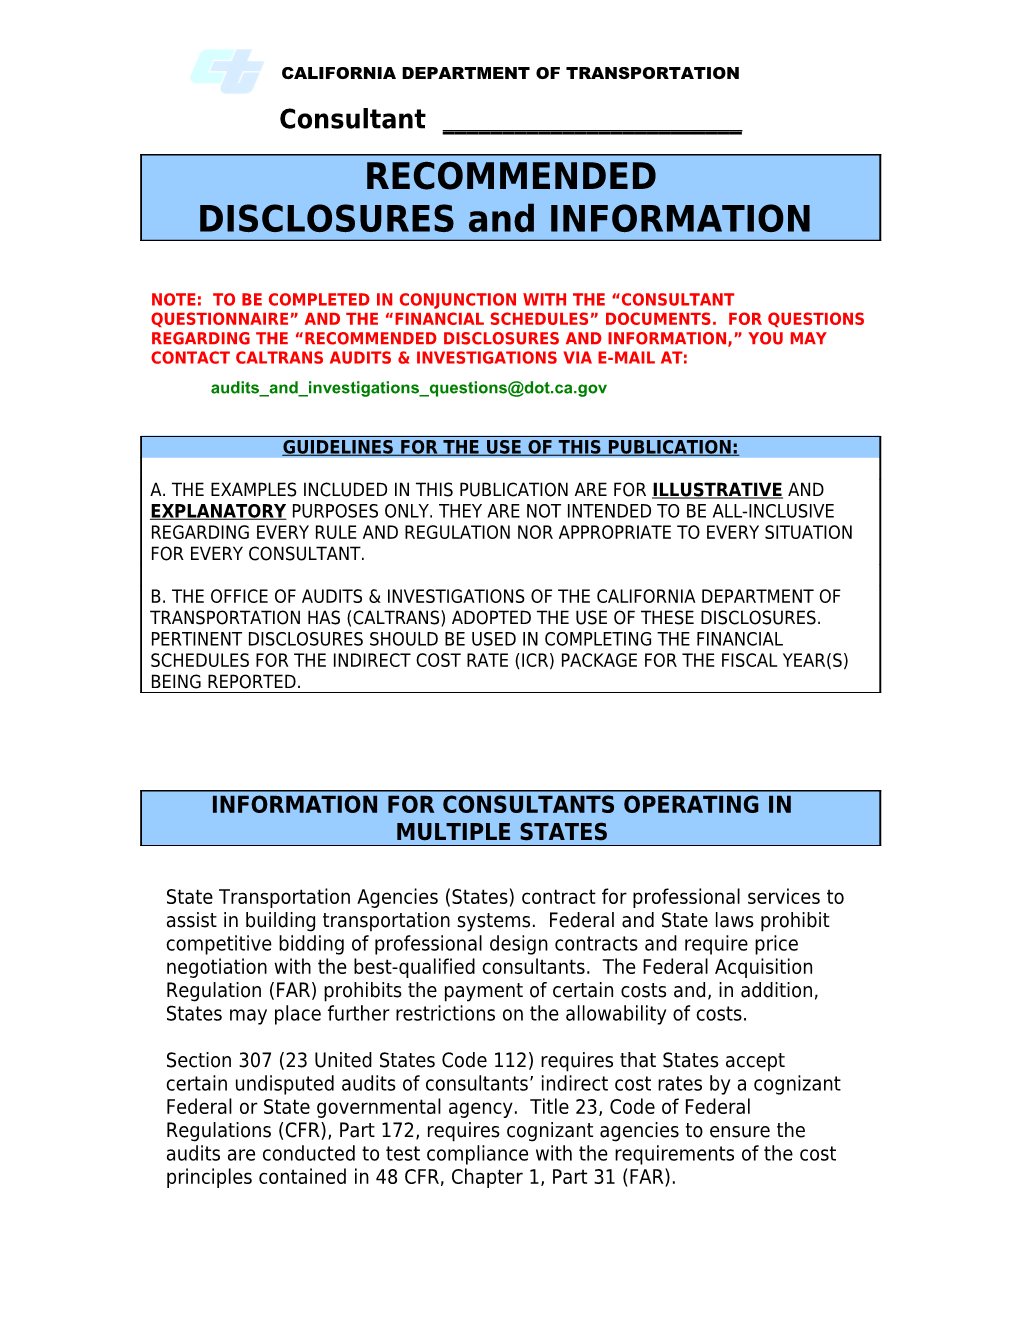 Publication of Recommended Disclosures and Information Needed When Audits Are Intended